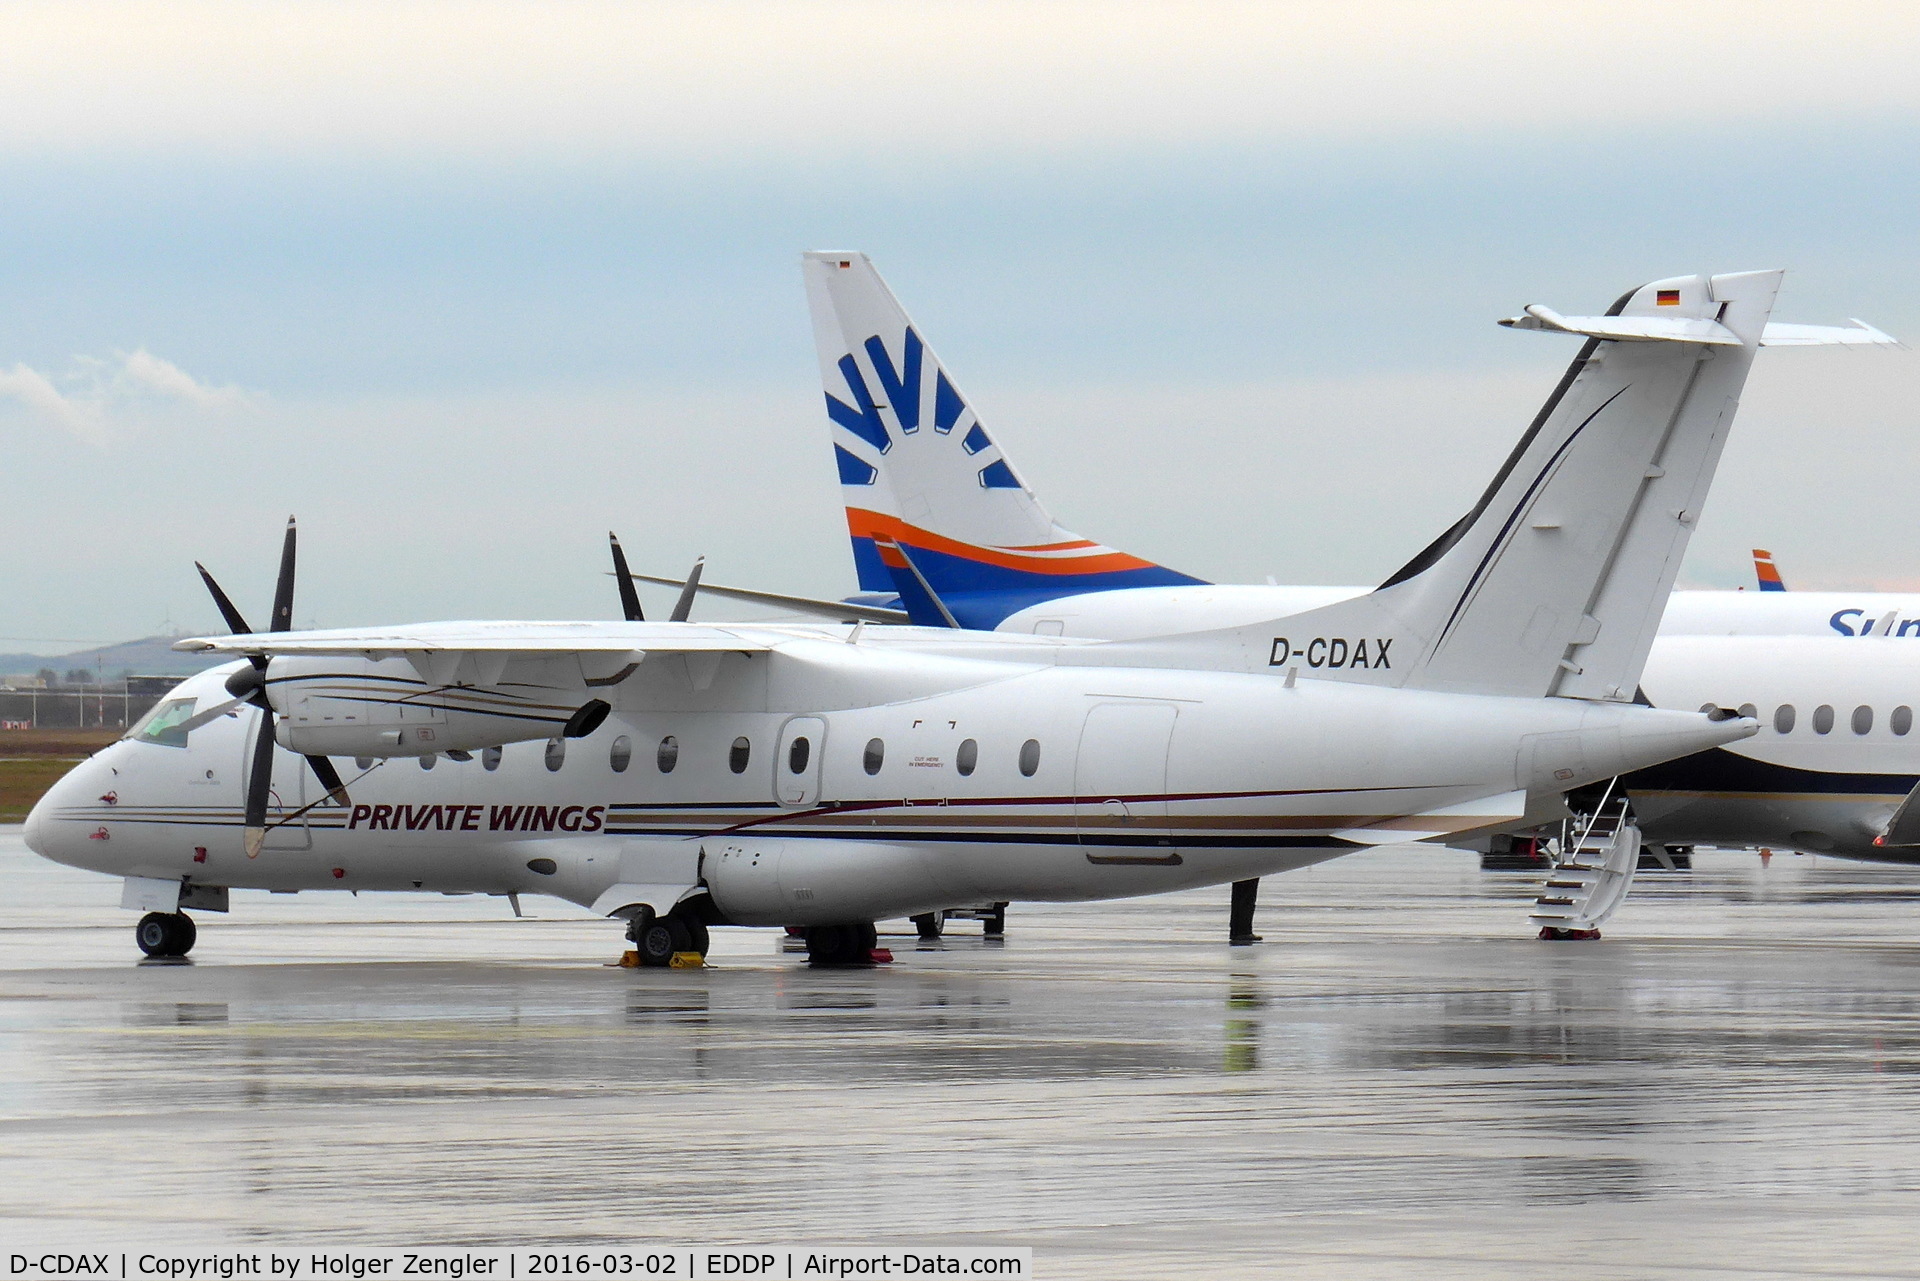 D-CDAX, 1998 Dornier 328-100 C/N 3087, Apron 1 east is crowded and pretty wet....